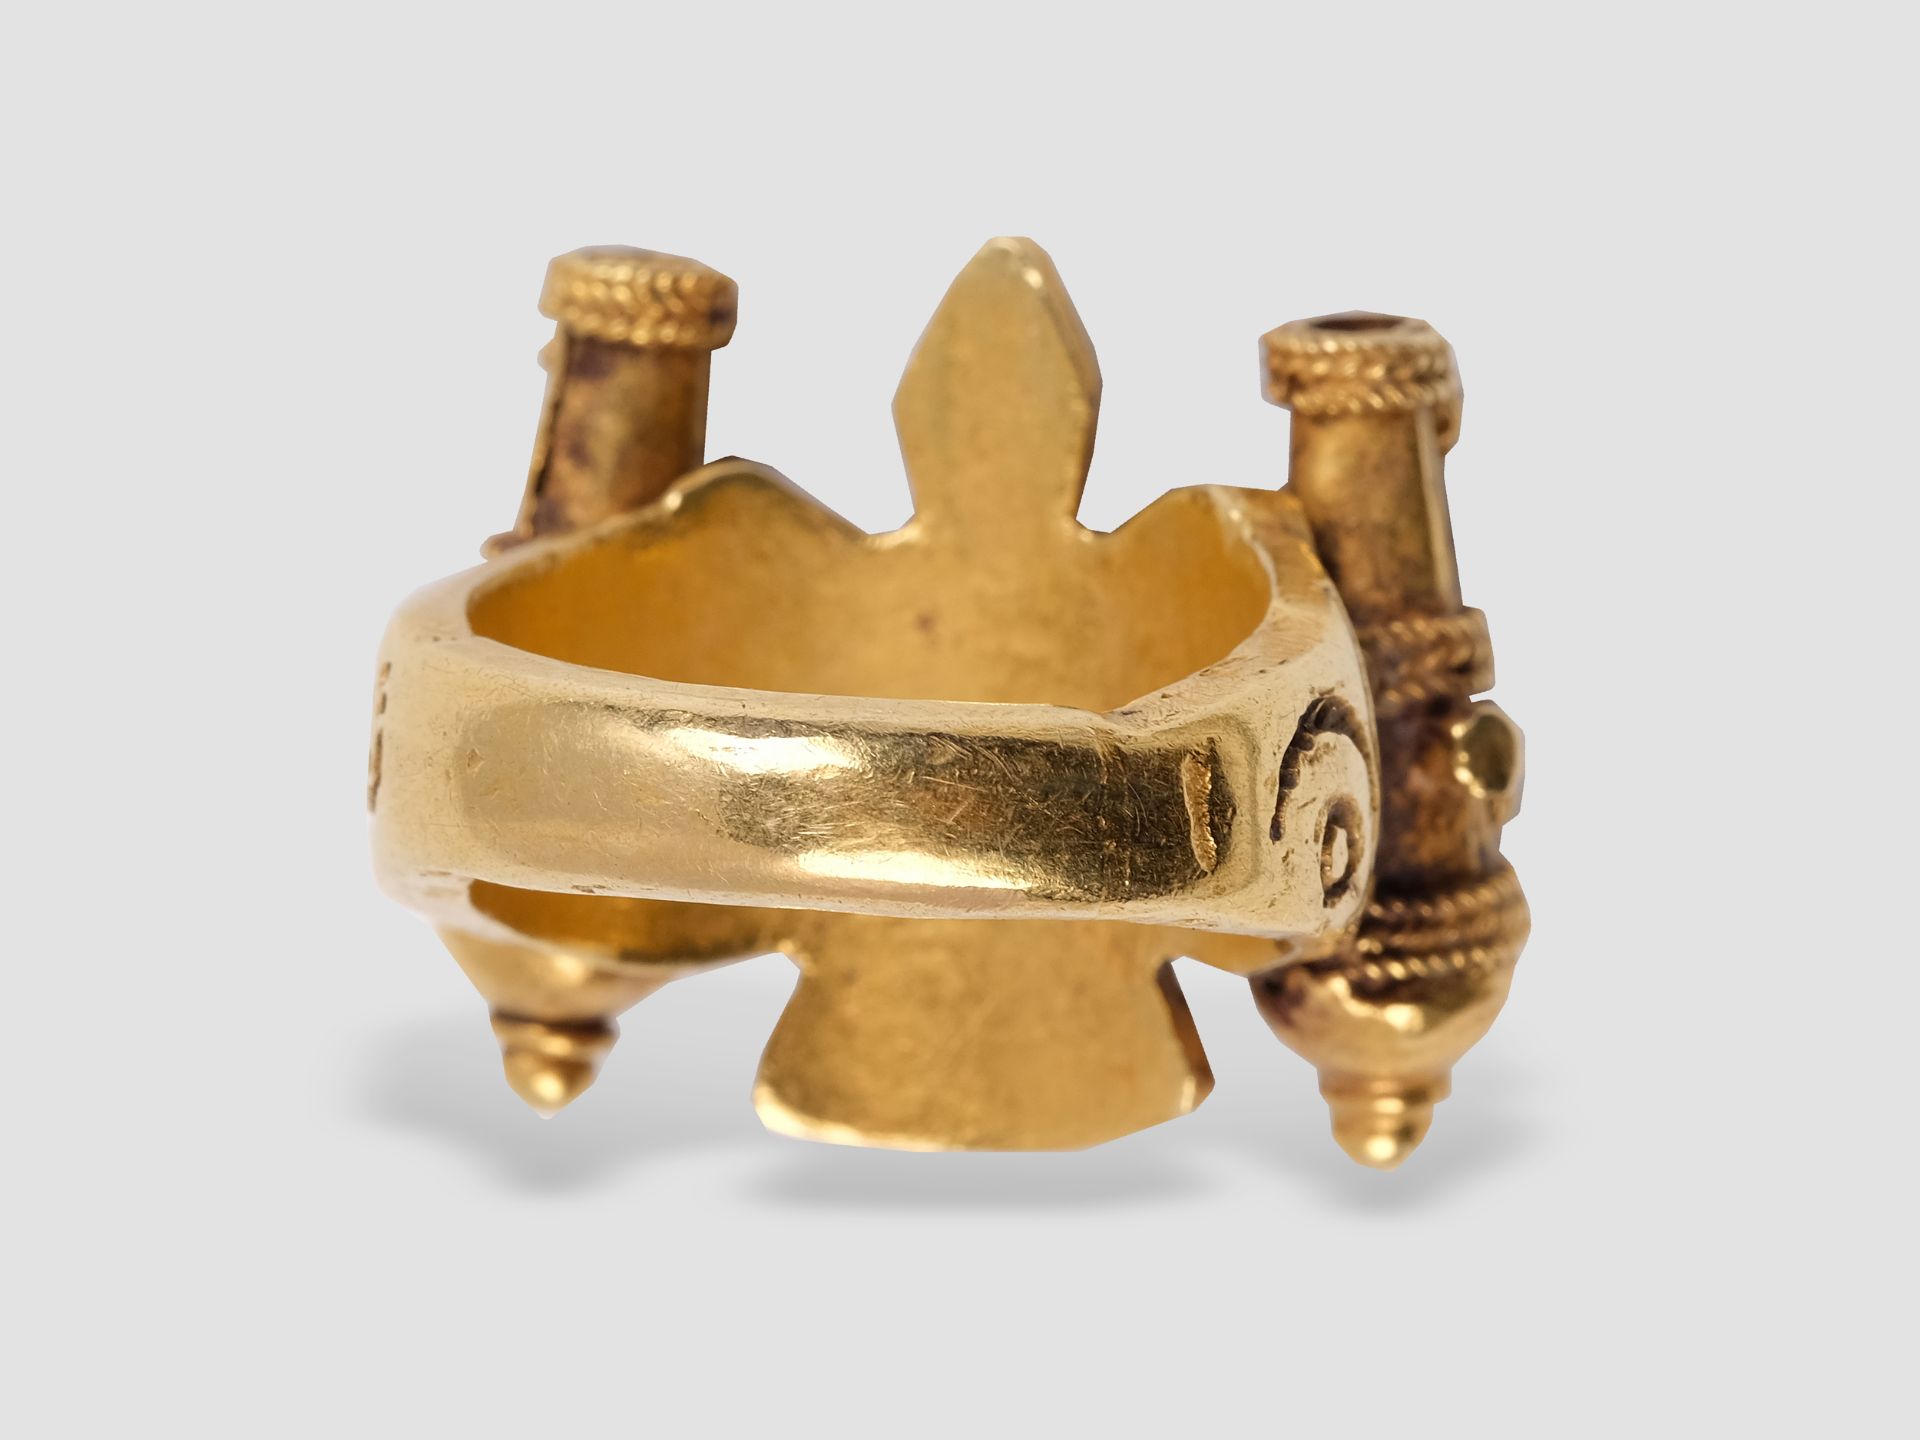 Akan gold ring, West Africa, Akan, Gold, approx. 18 carat - Image 2 of 5